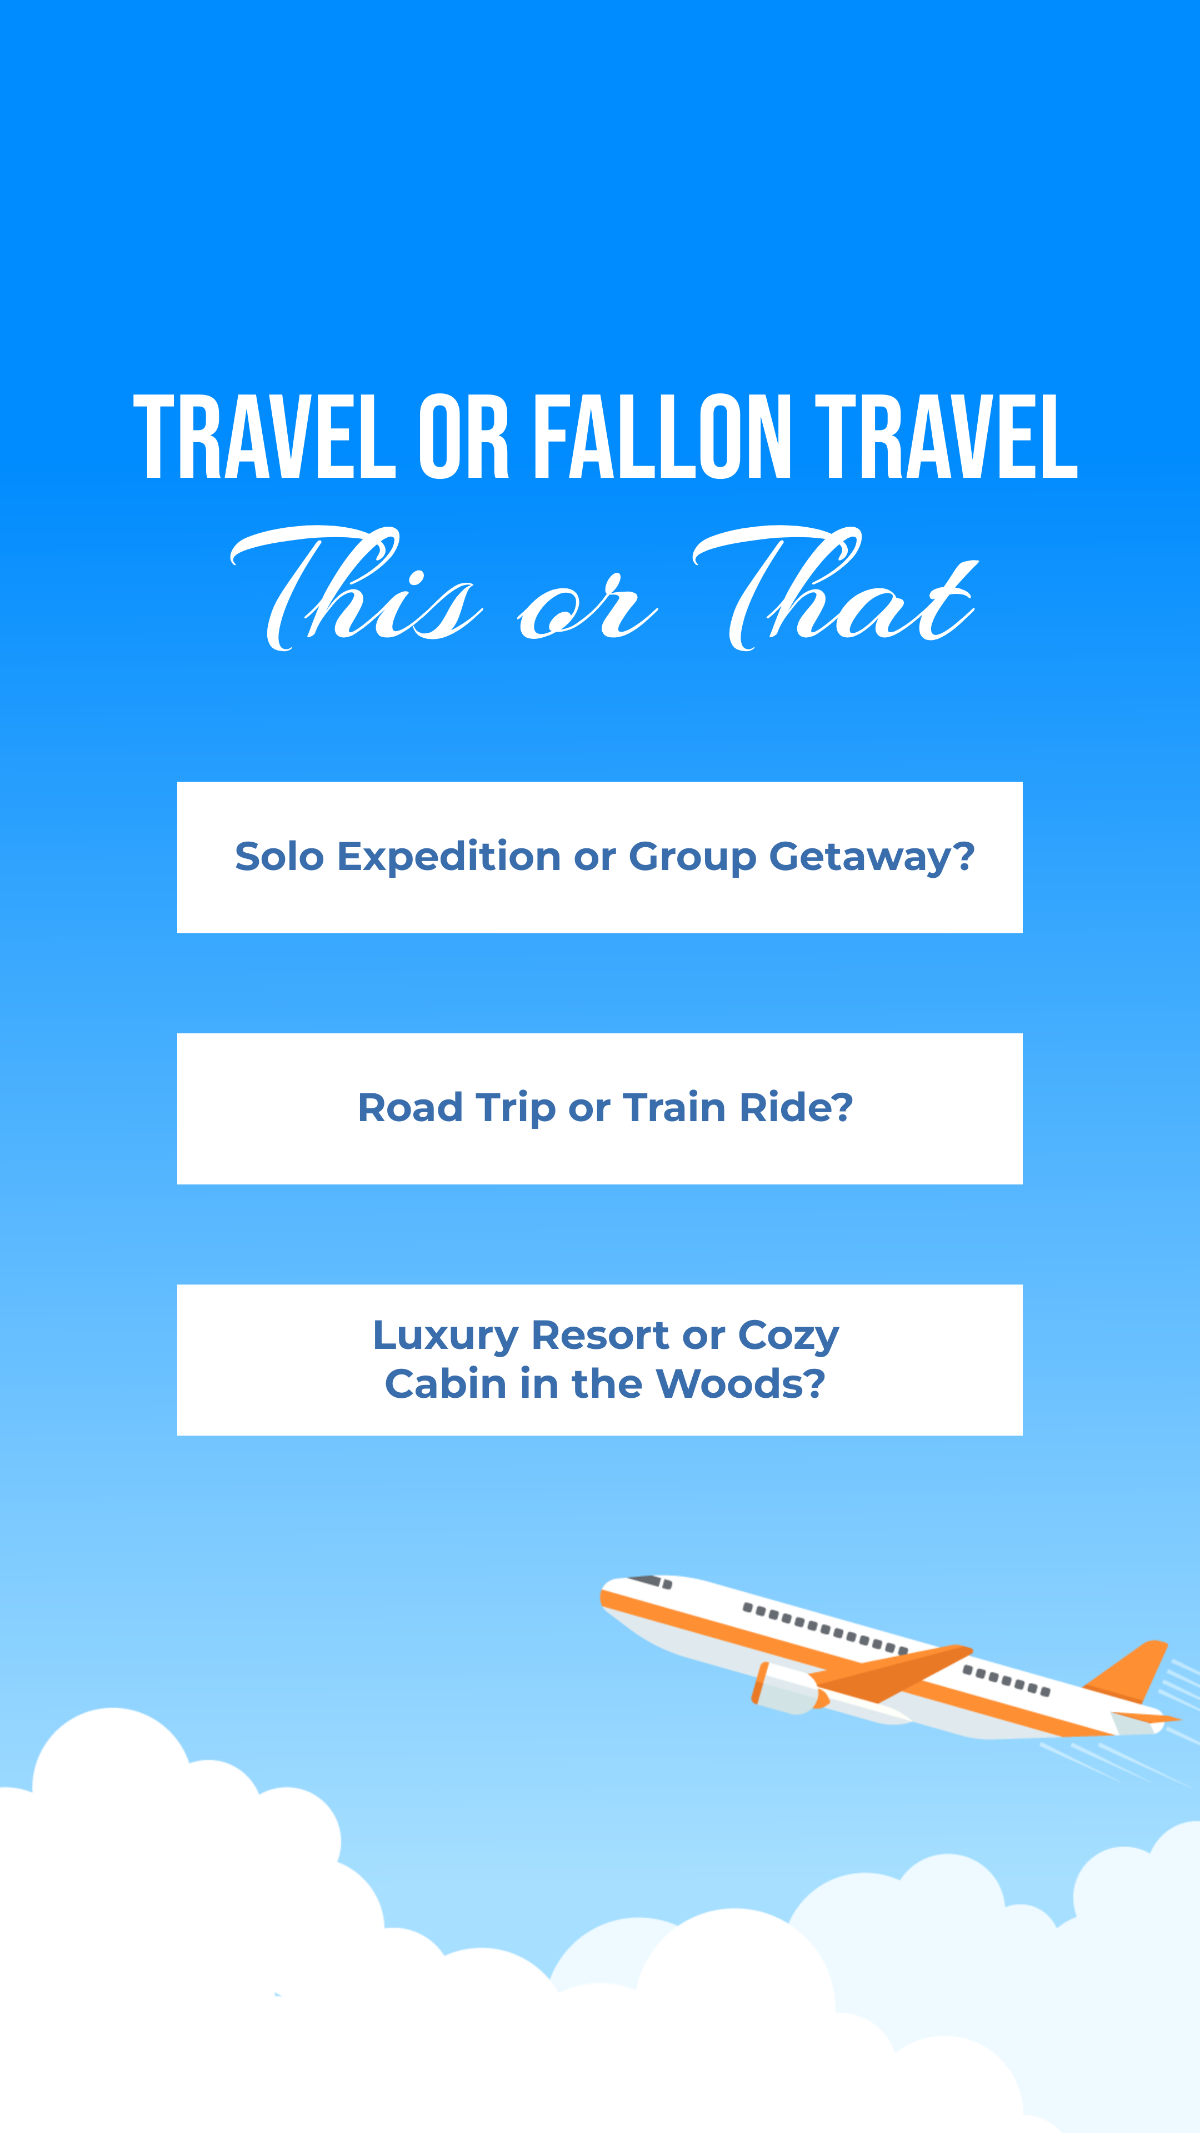 This or That Instagram Story for Travel or Fallon Travel Template